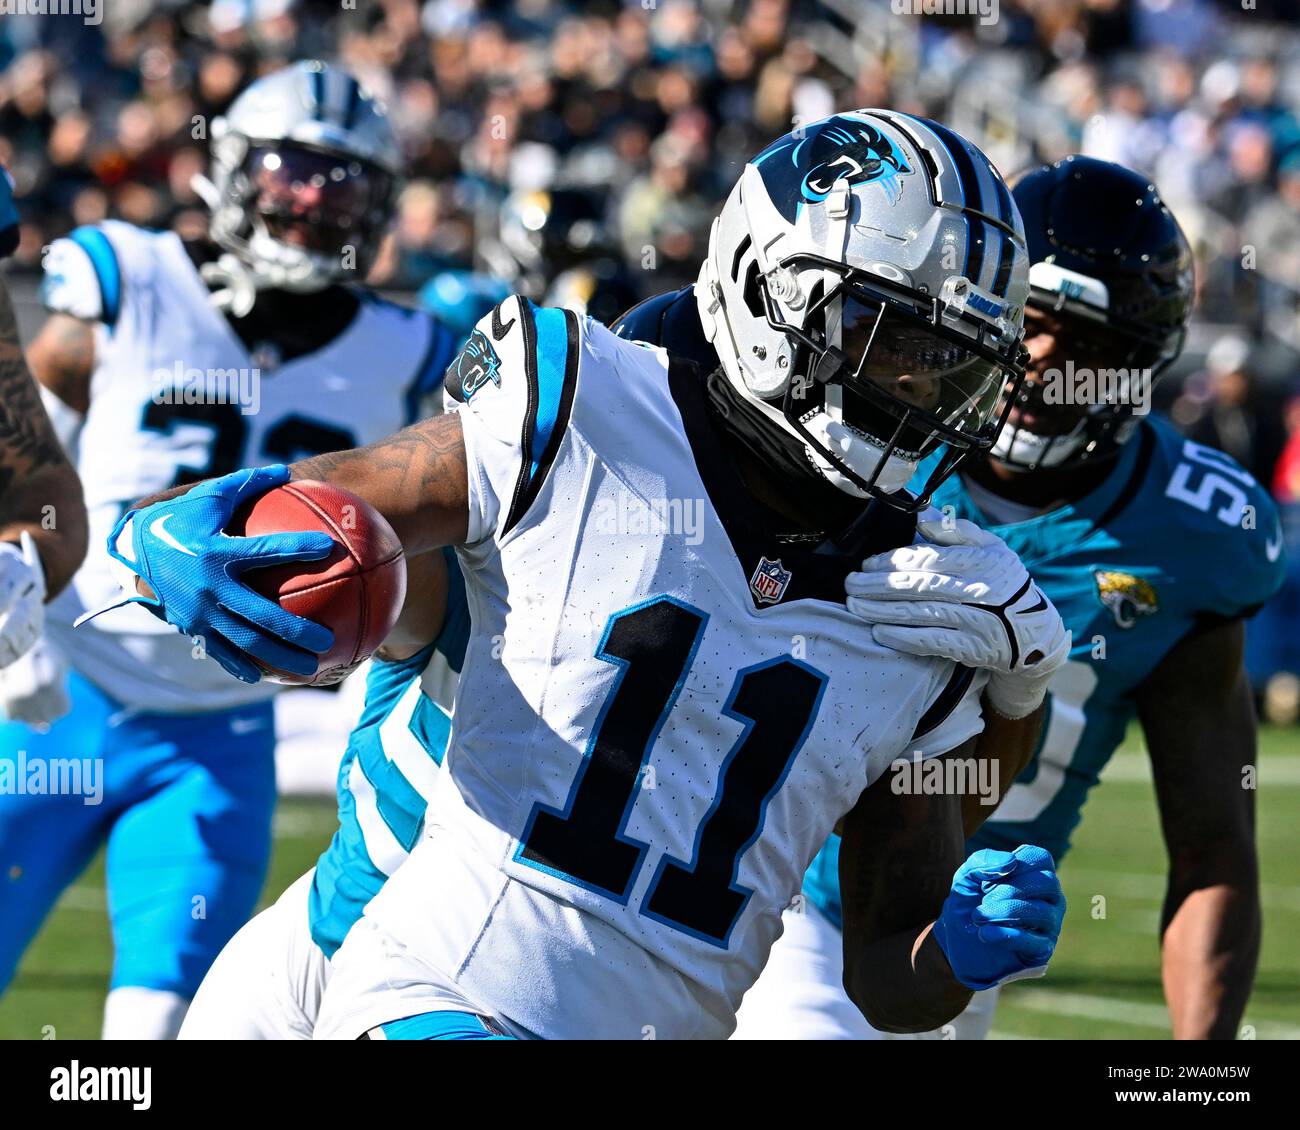 Jacksonville, United States. 31st Dec, 2023. Carolina Wide Receiver Ihmir Smith-Marsette runs for short yardage after making a reception in the third quarter as the Panthers compete against the Jaguars at the EverBank Stadium in Jacksonville, Florida on Sunday, December 31, 2023. The Jaguars defeated Carolina 26-0. Photo by Joe Marino/UPI. Credit: UPI/Alamy Live News Stock Photo